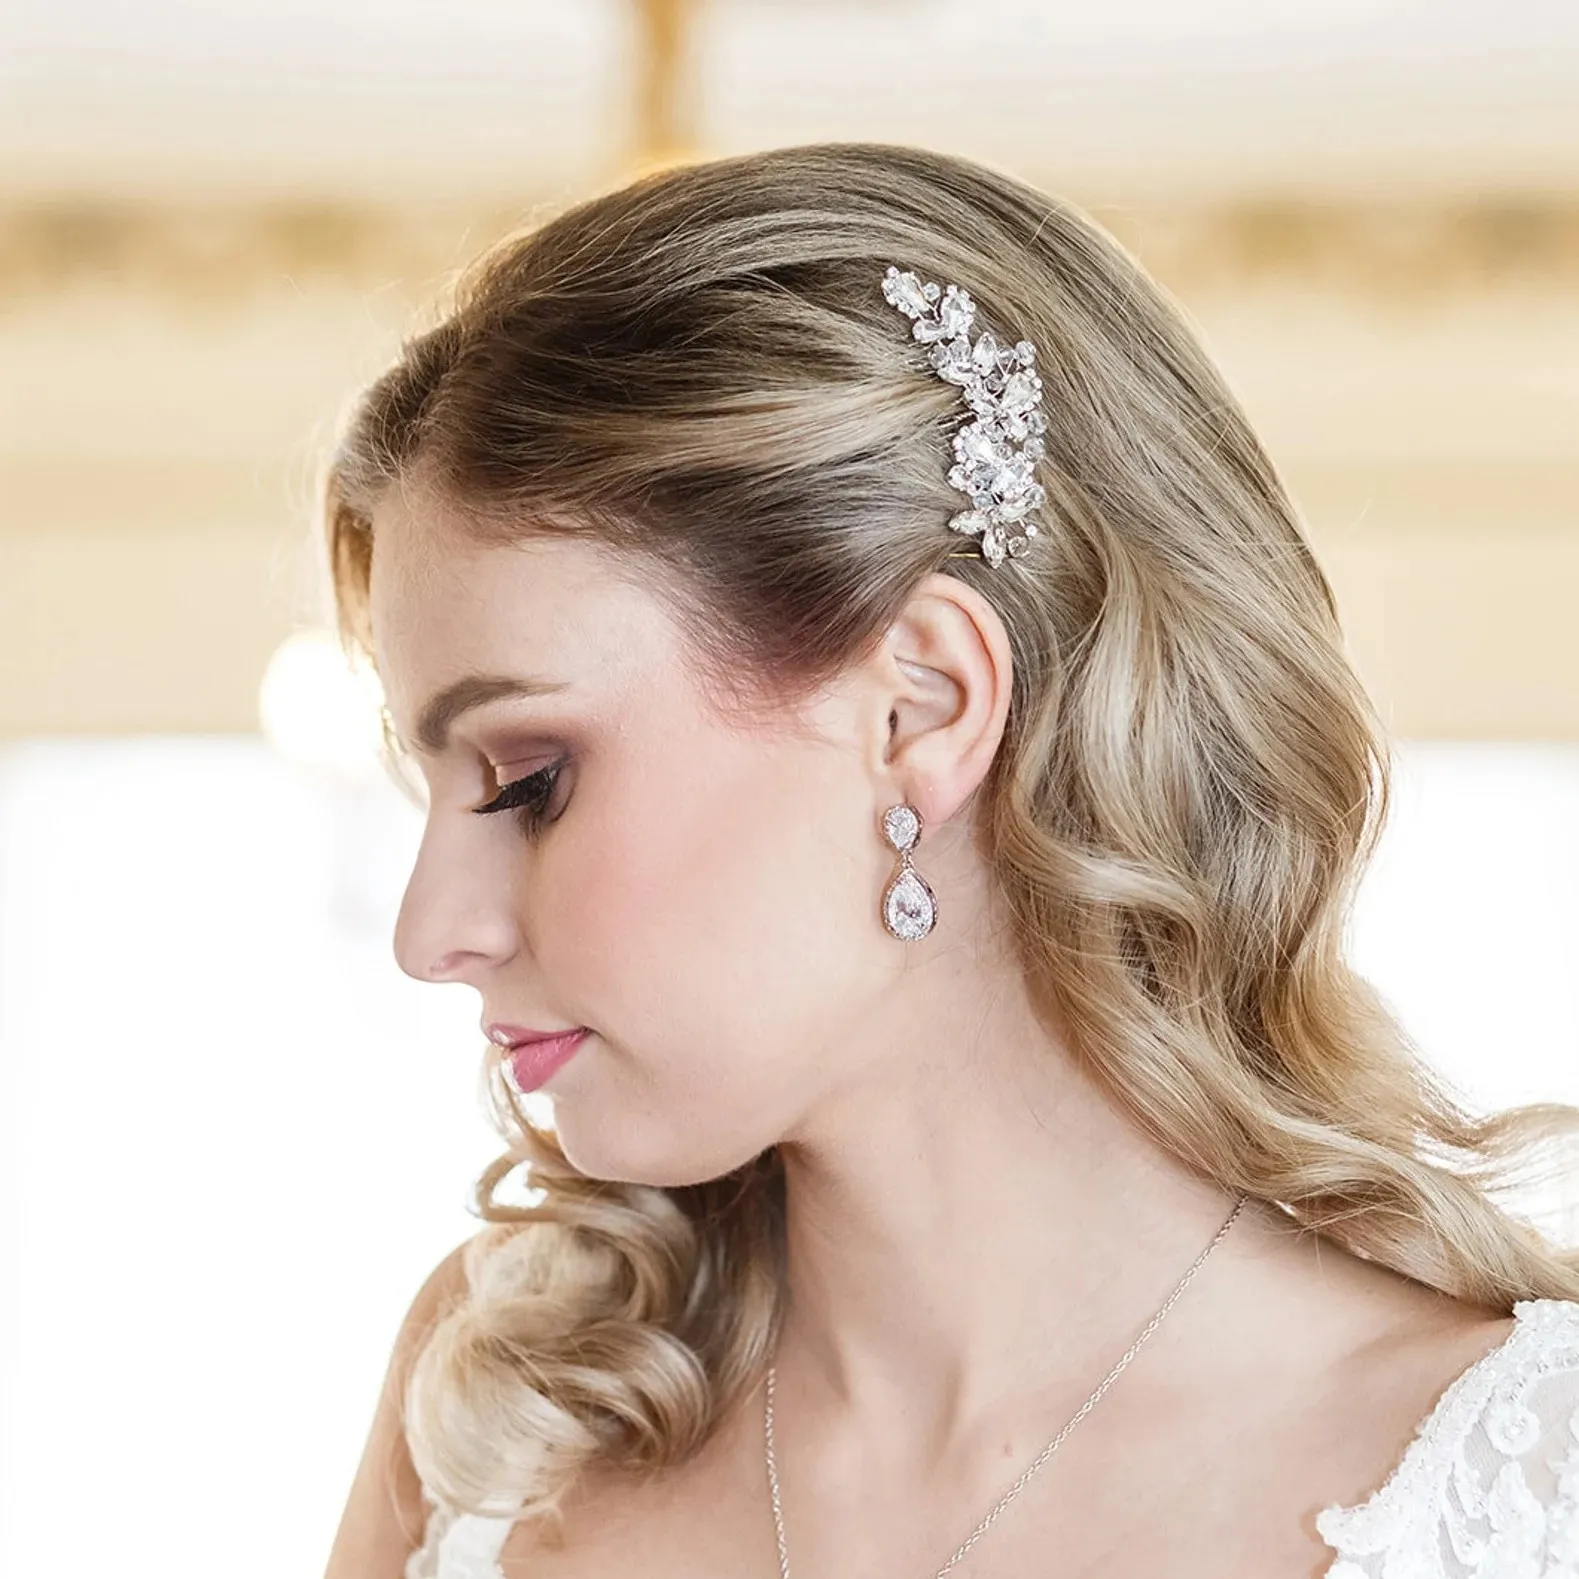 Wedding Hair Accessories: Rhinestone Bridal Comb Boho Bridal Headpiece In  Gold, Silver, And Rose Gold CL0233 From Allloves, $5.91